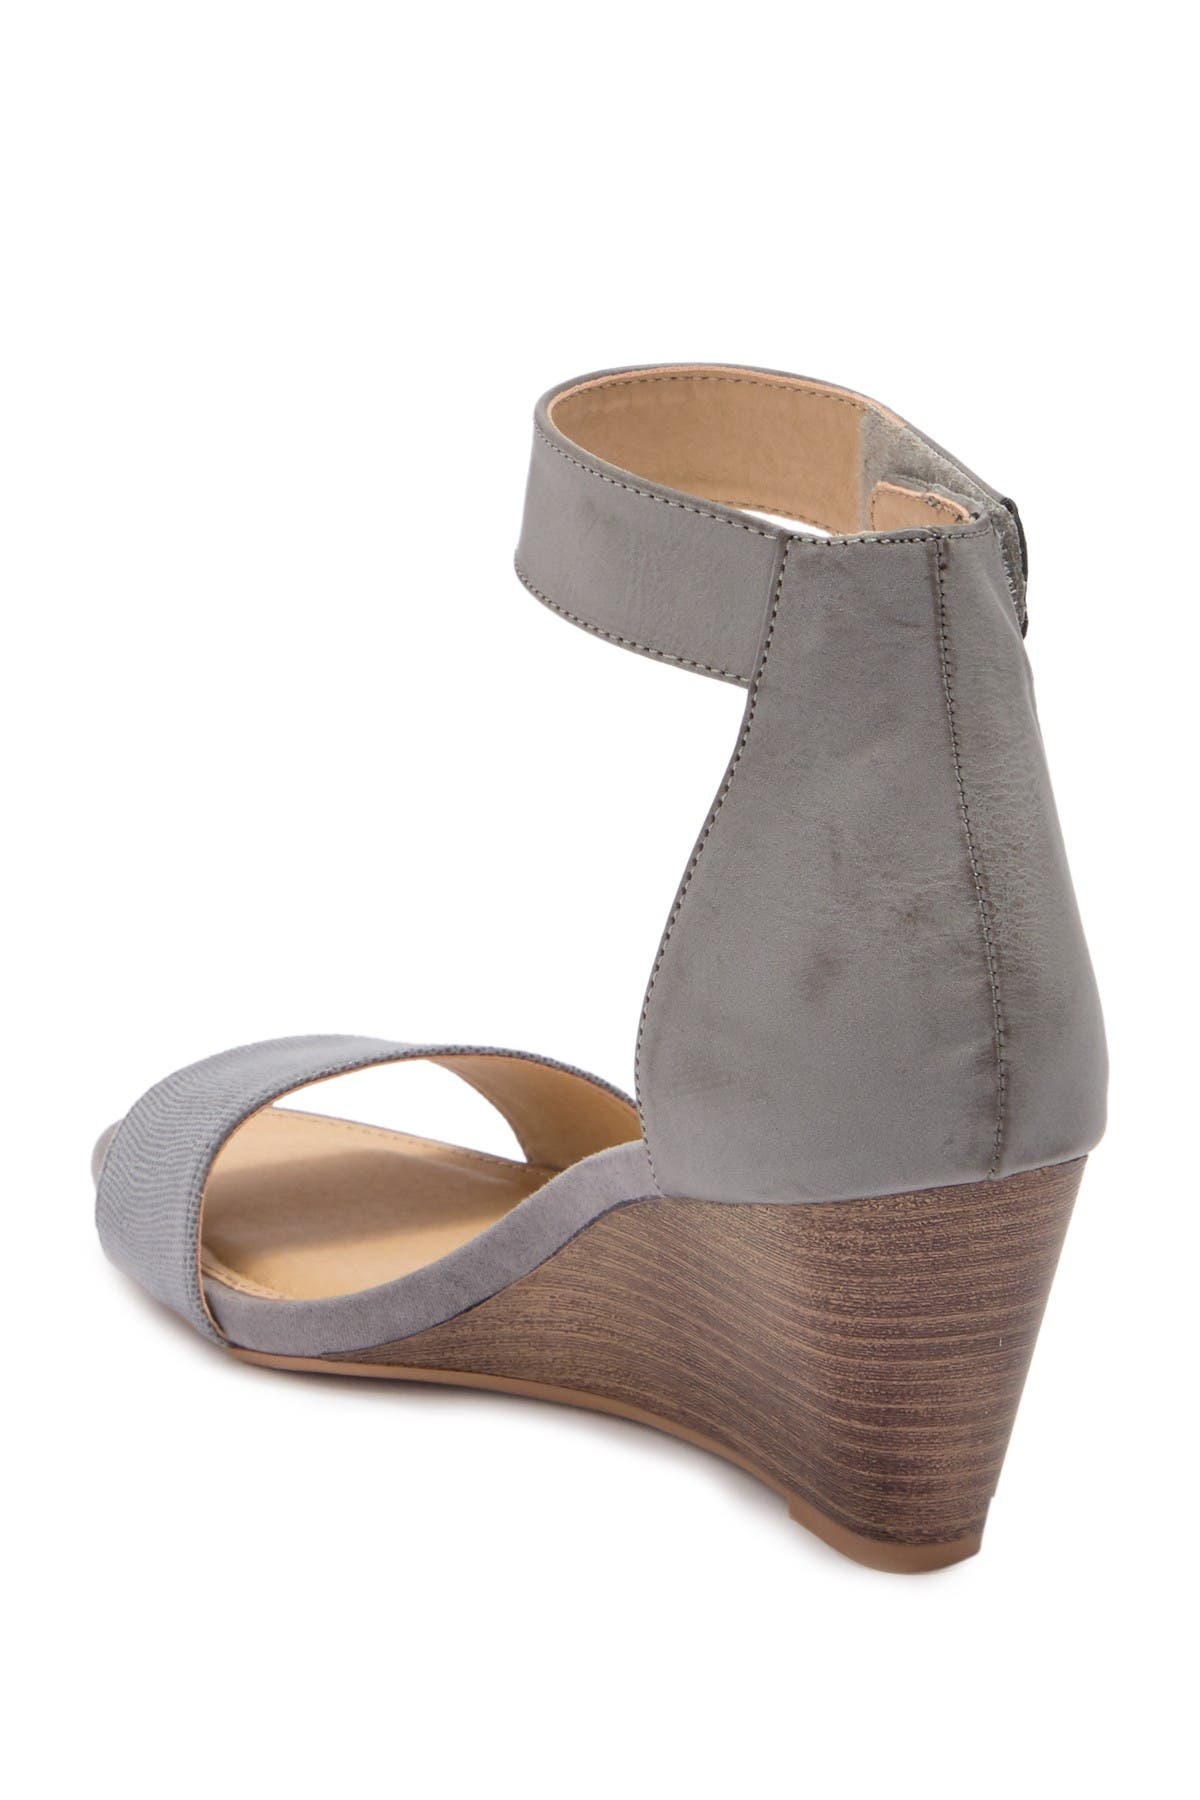 cl by laundry hot zone wedge sandal